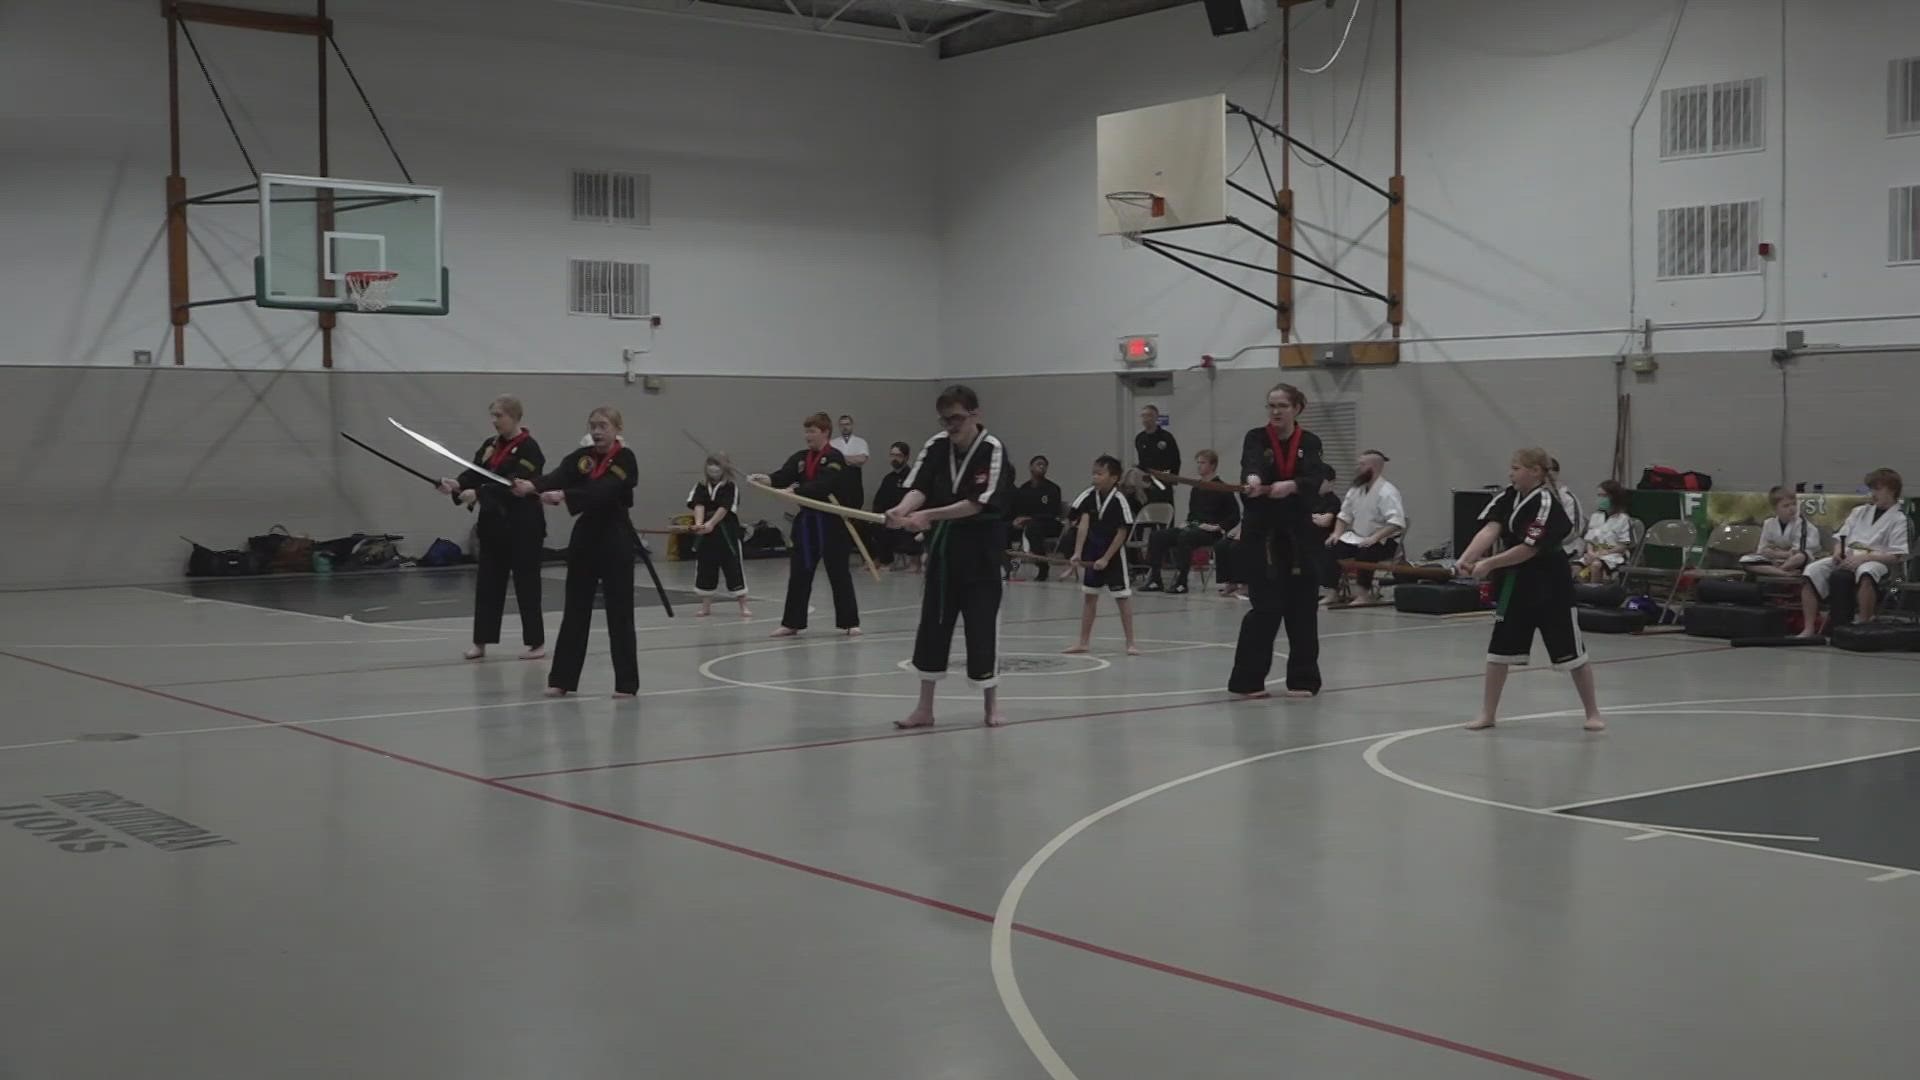 The First Lutheran School held the Winter Martial Arts Expo in Knoxville. It's a chance for people to see different martial arts in person.